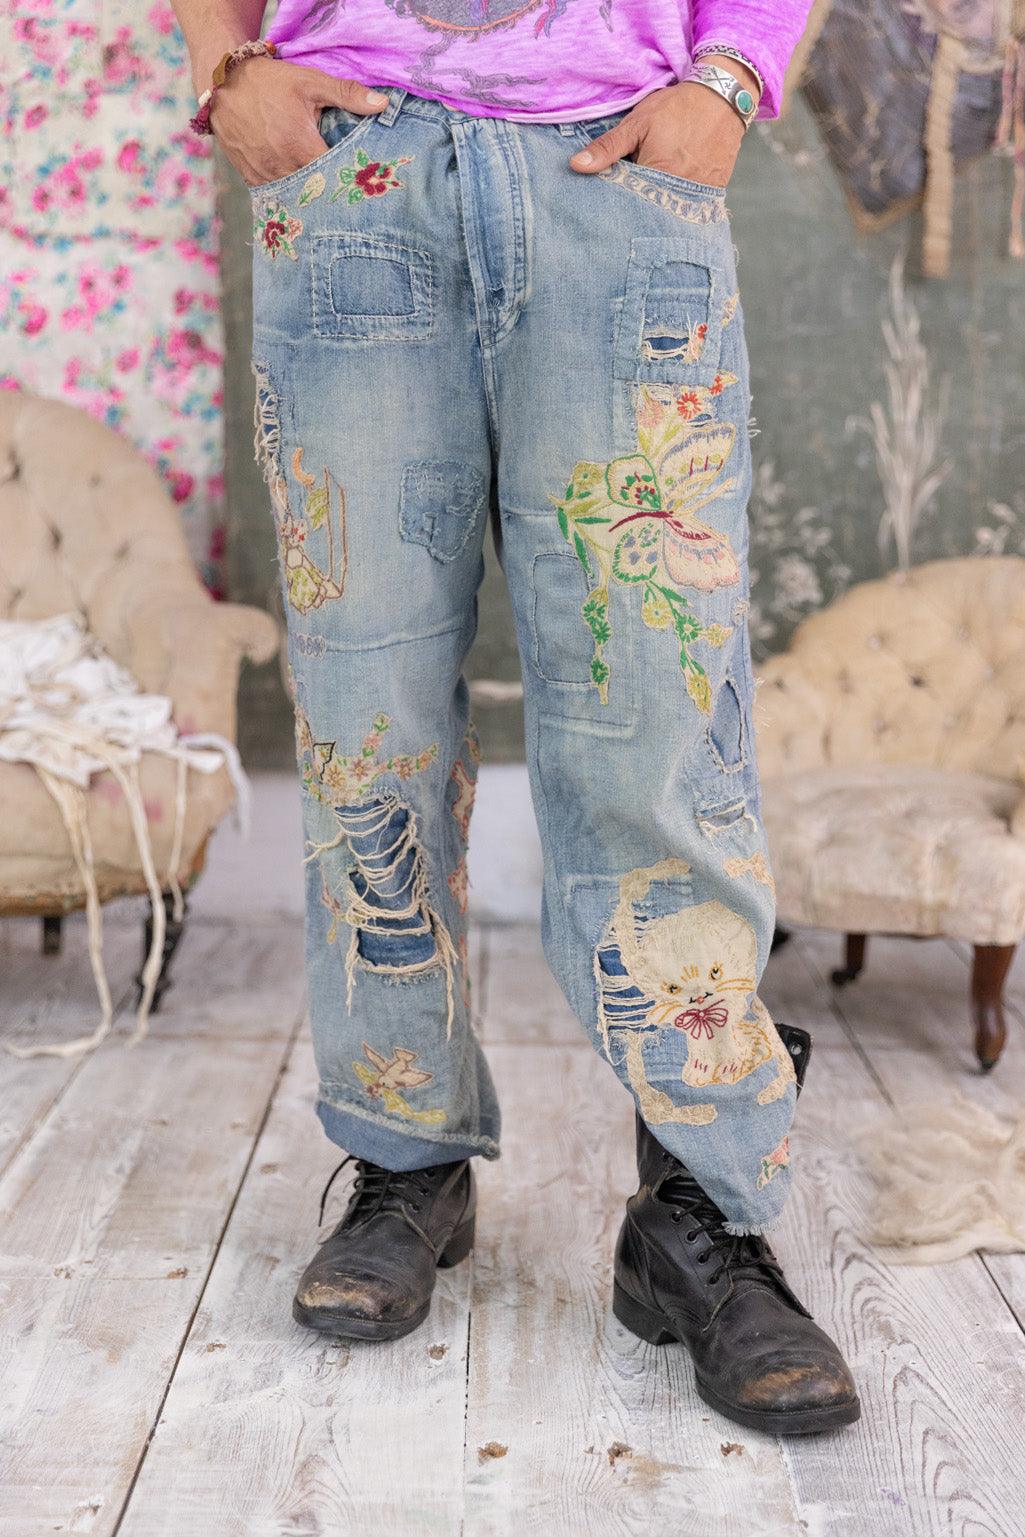 Mixed Signals Ripped Baggy Jeans - Pink